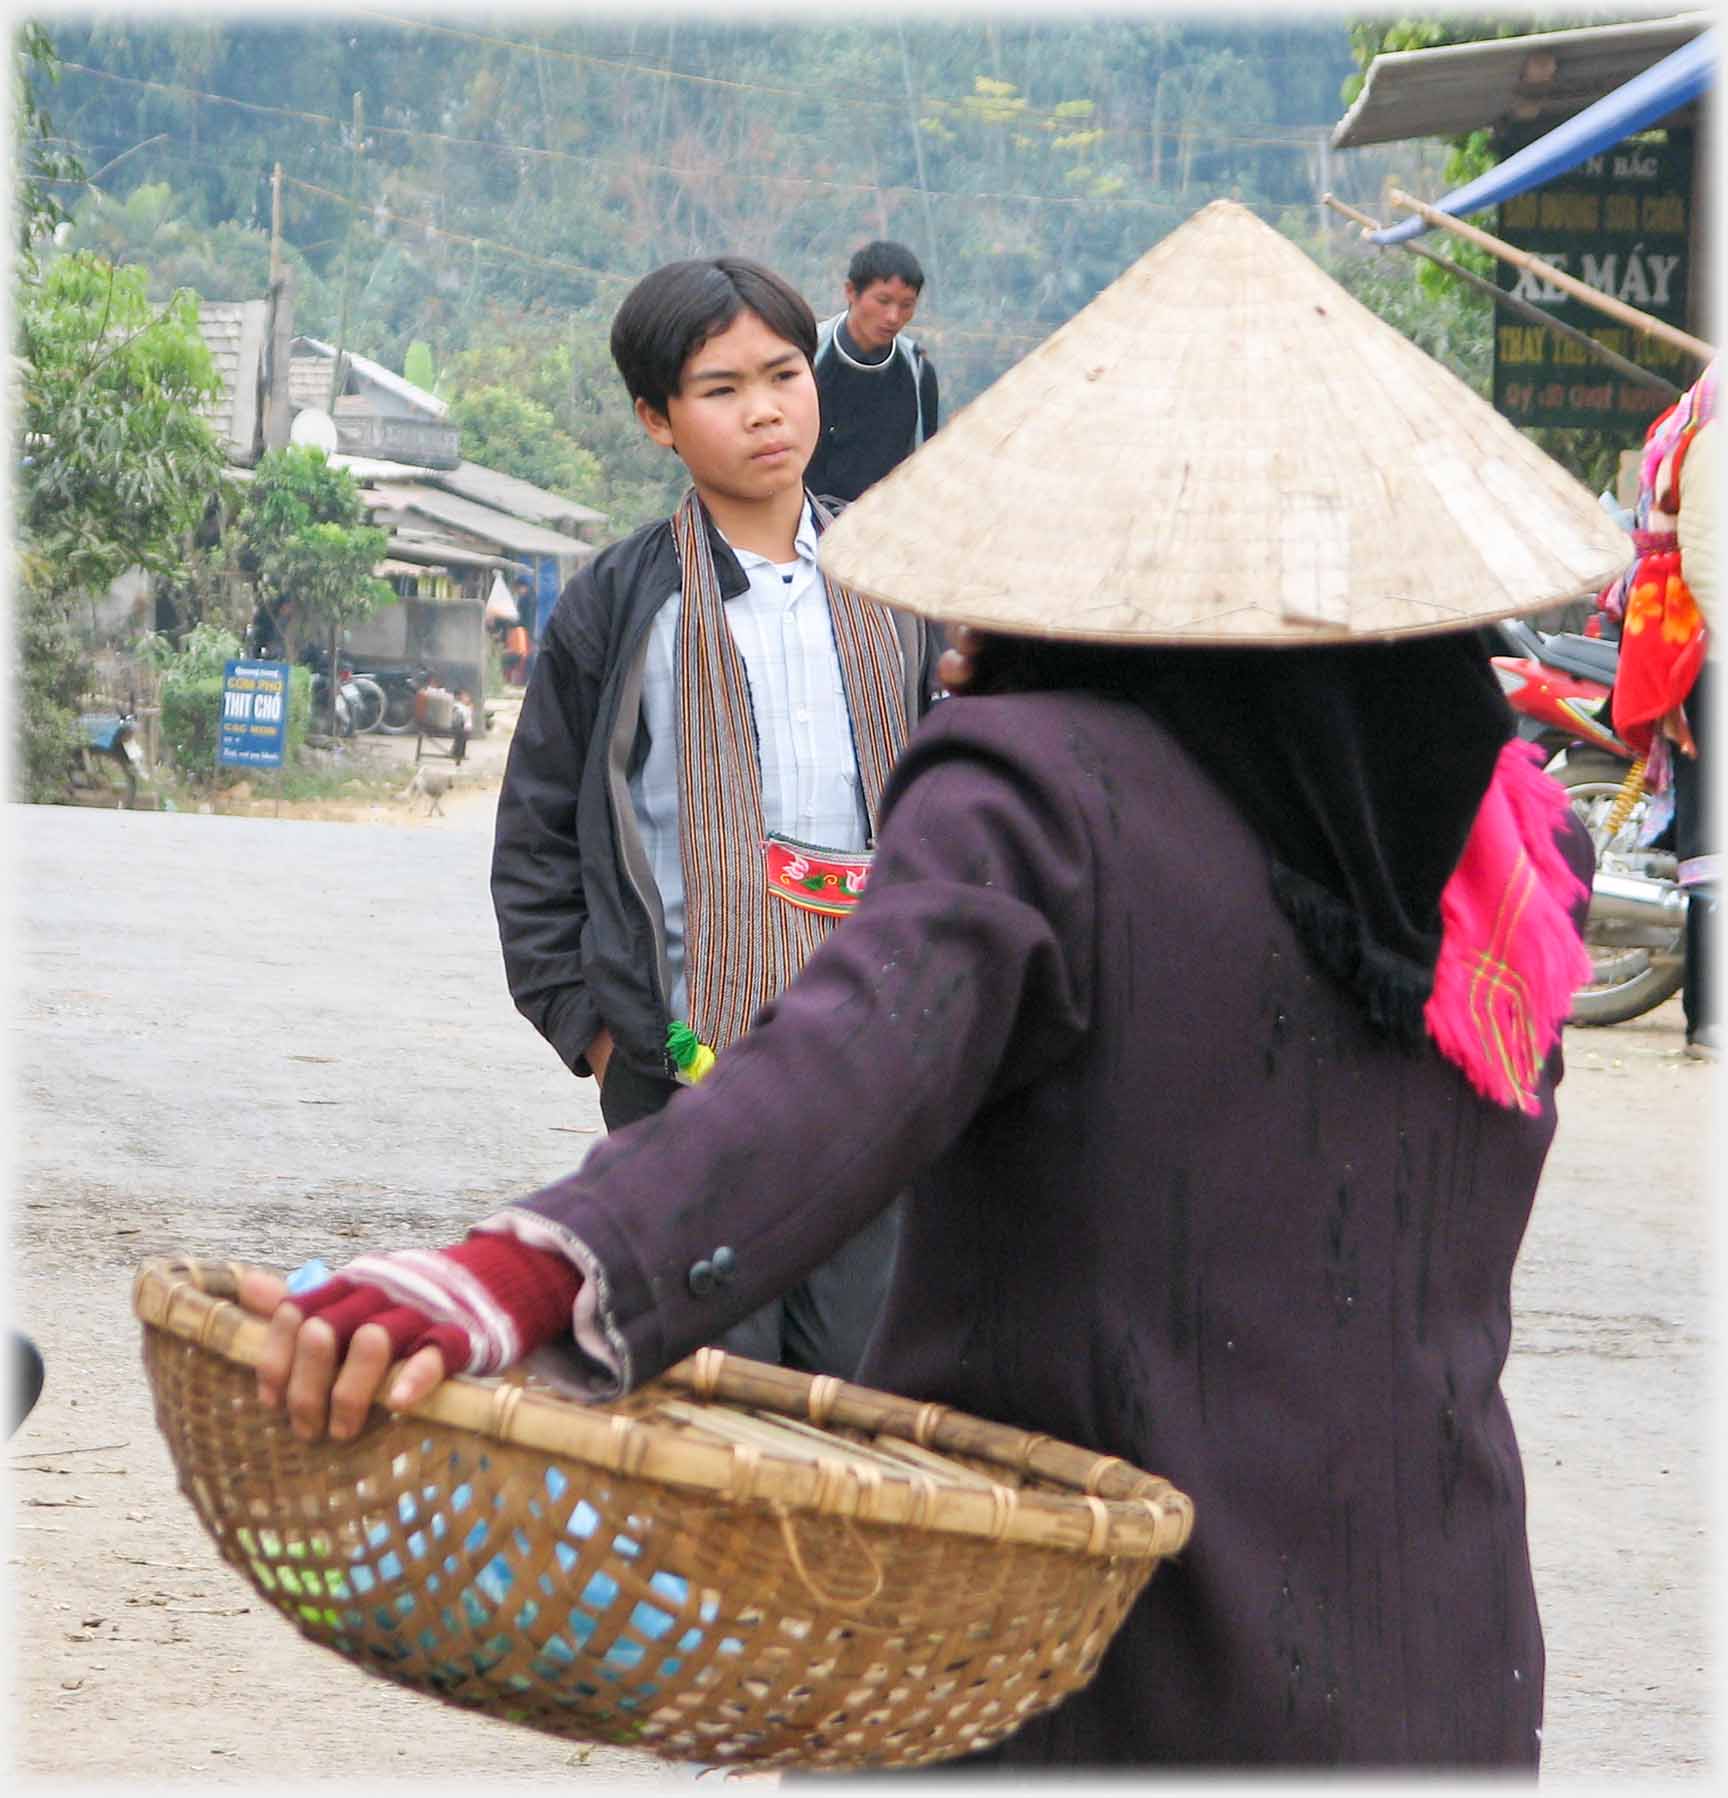 Woman in conical hat holding large flat basket, boy beyond with hair neatly dressed.